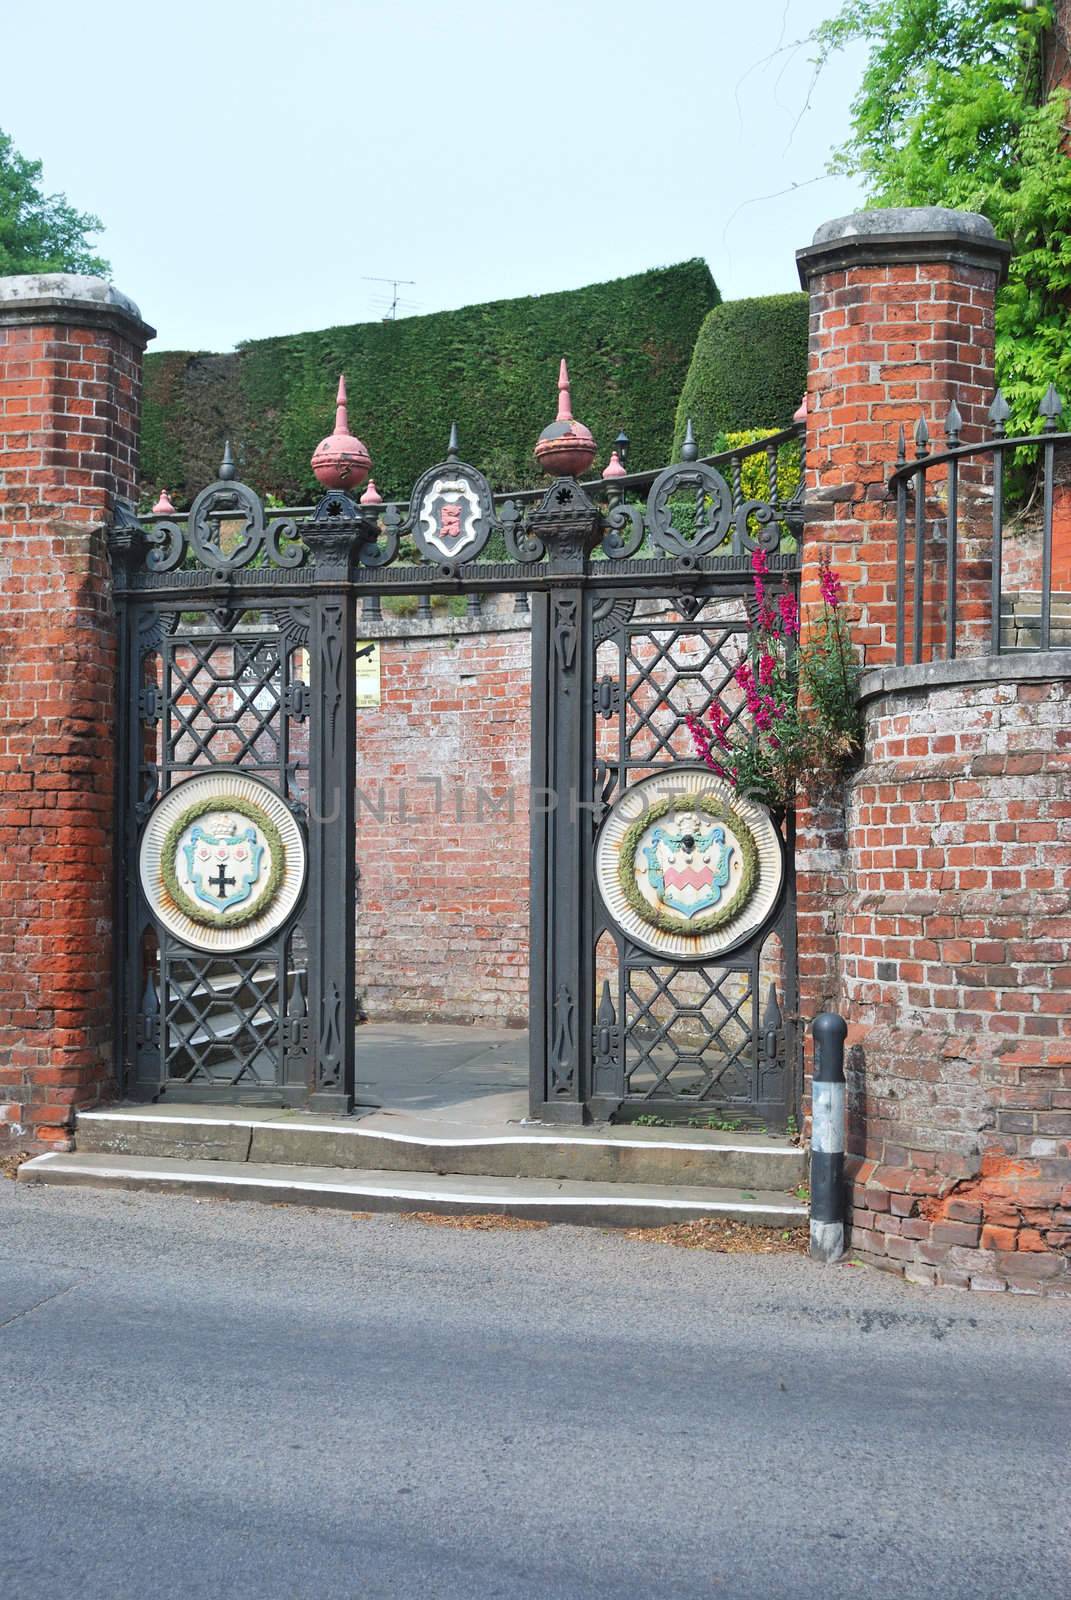 Wrought iron gates showing seckford coat of arms